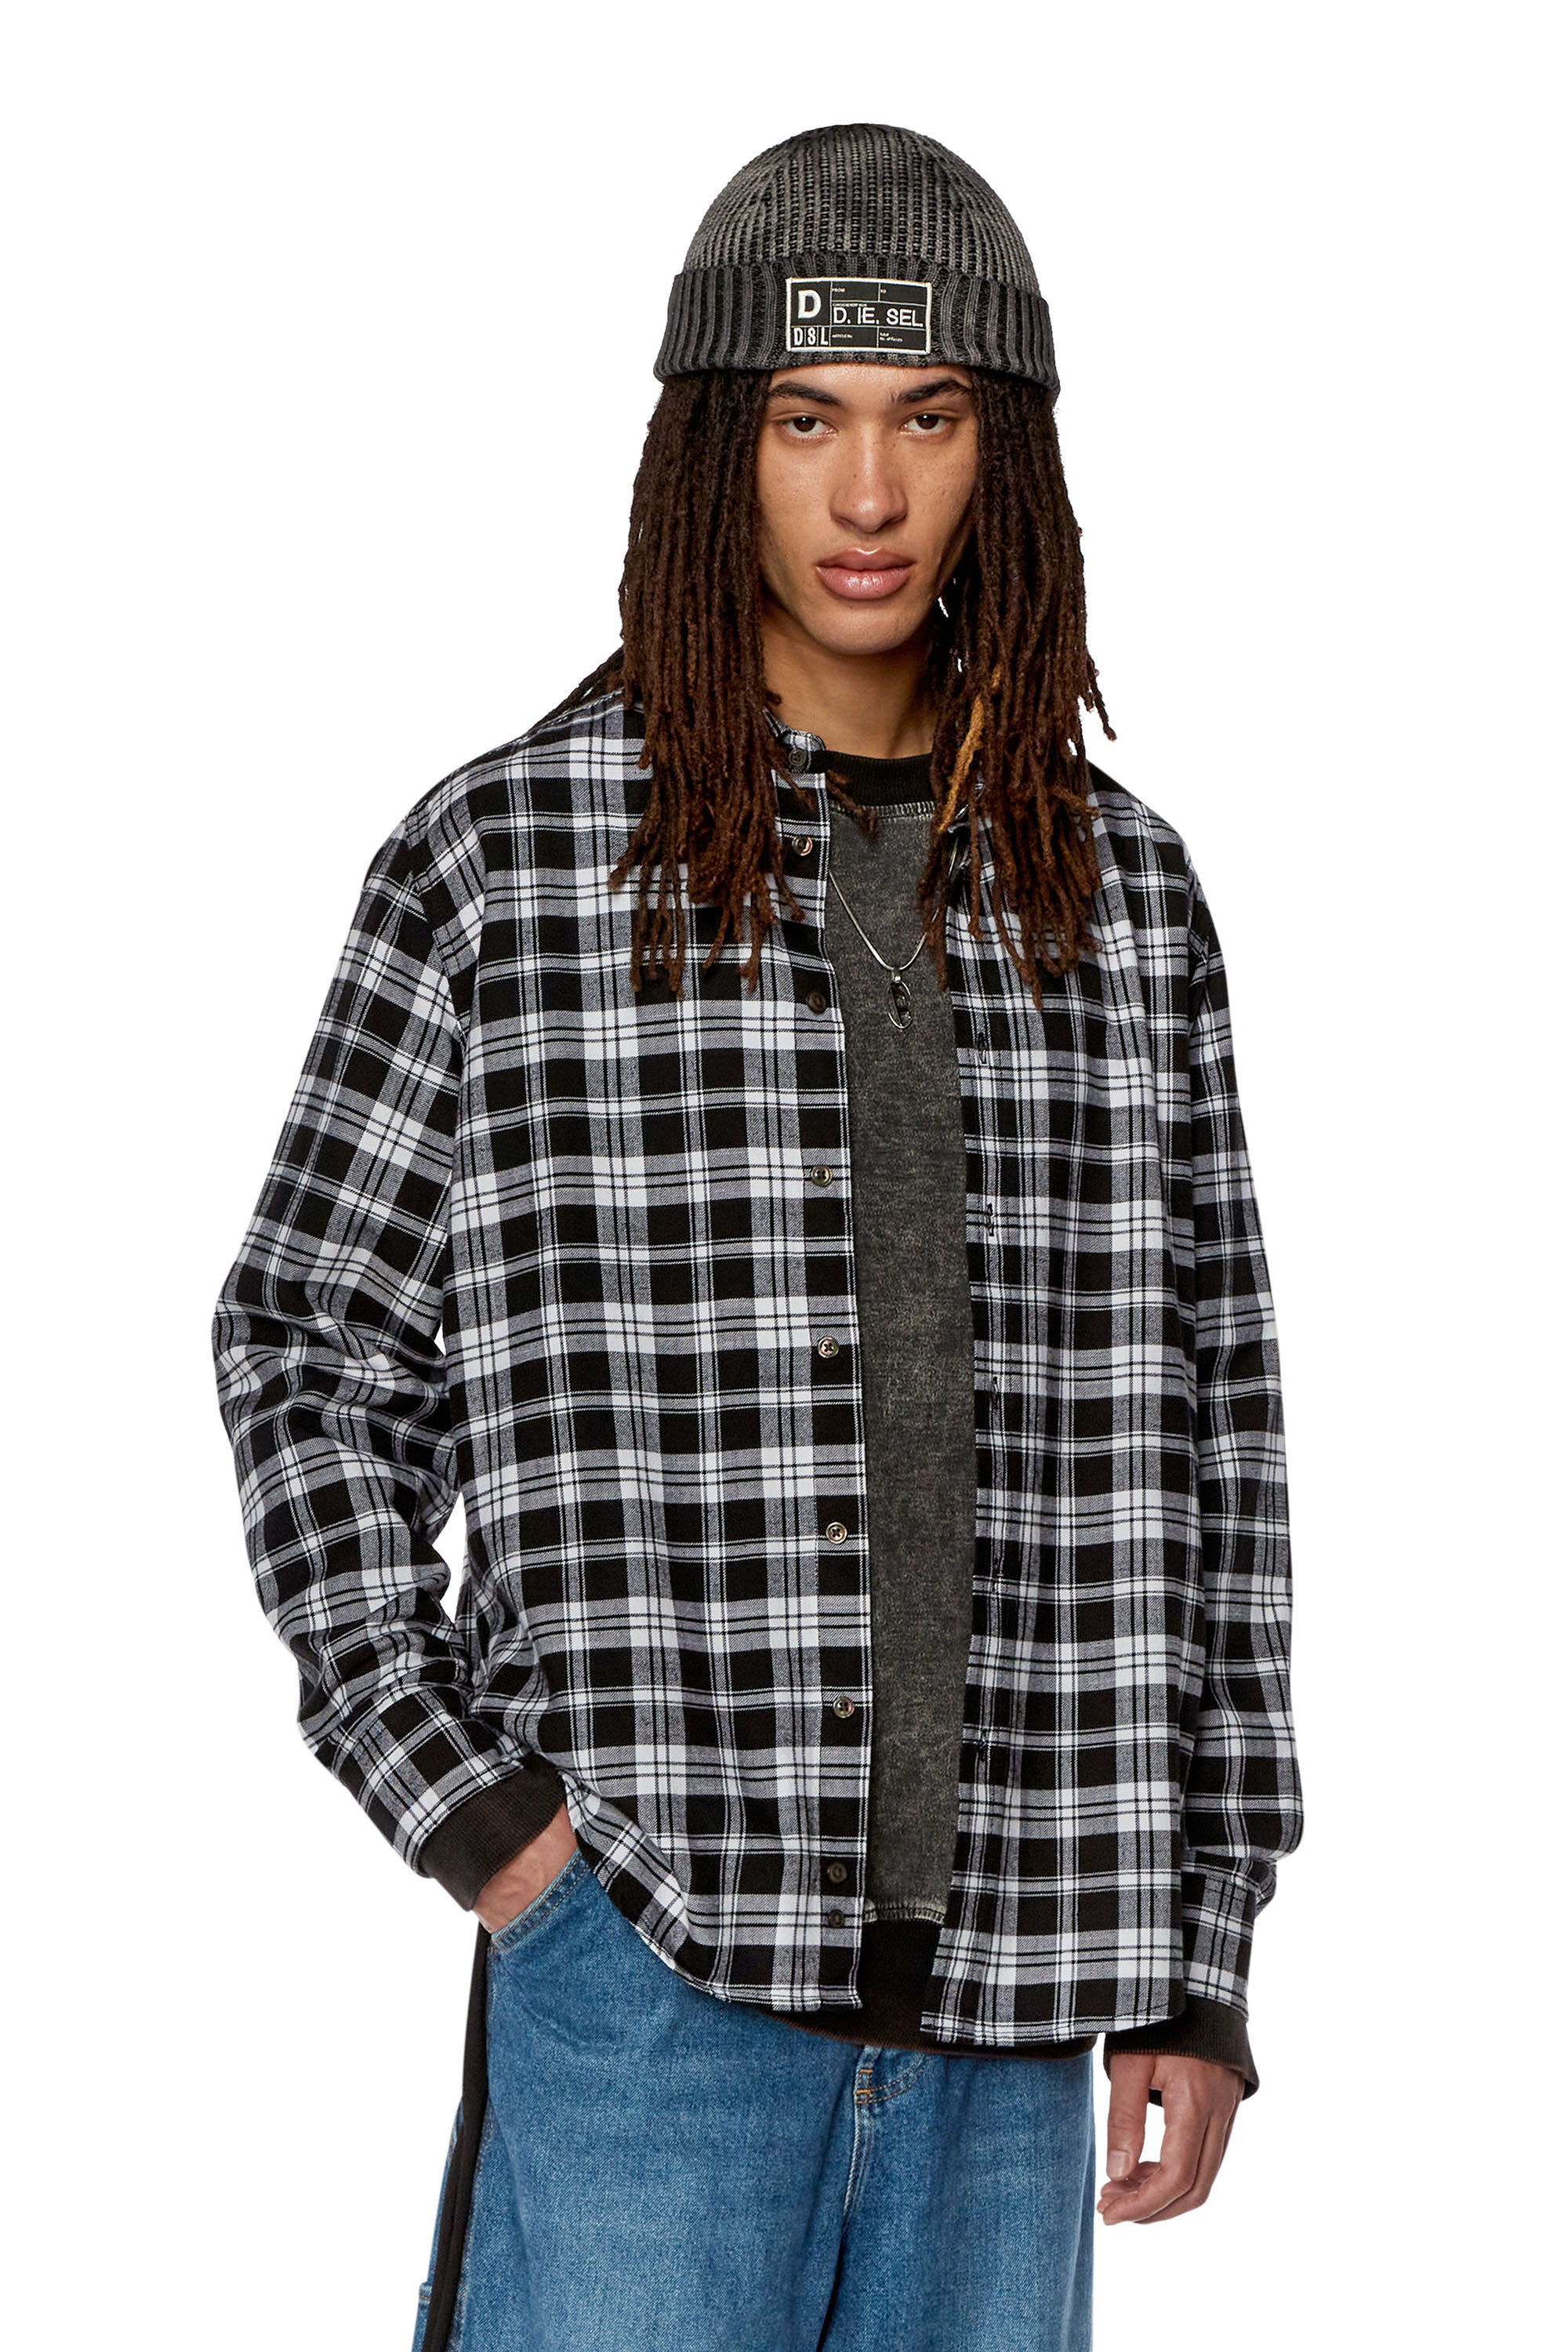 Diesel - S-UMBE-CHECK-NW, Man Shirt in checked flannel in Multicolor - Image 3